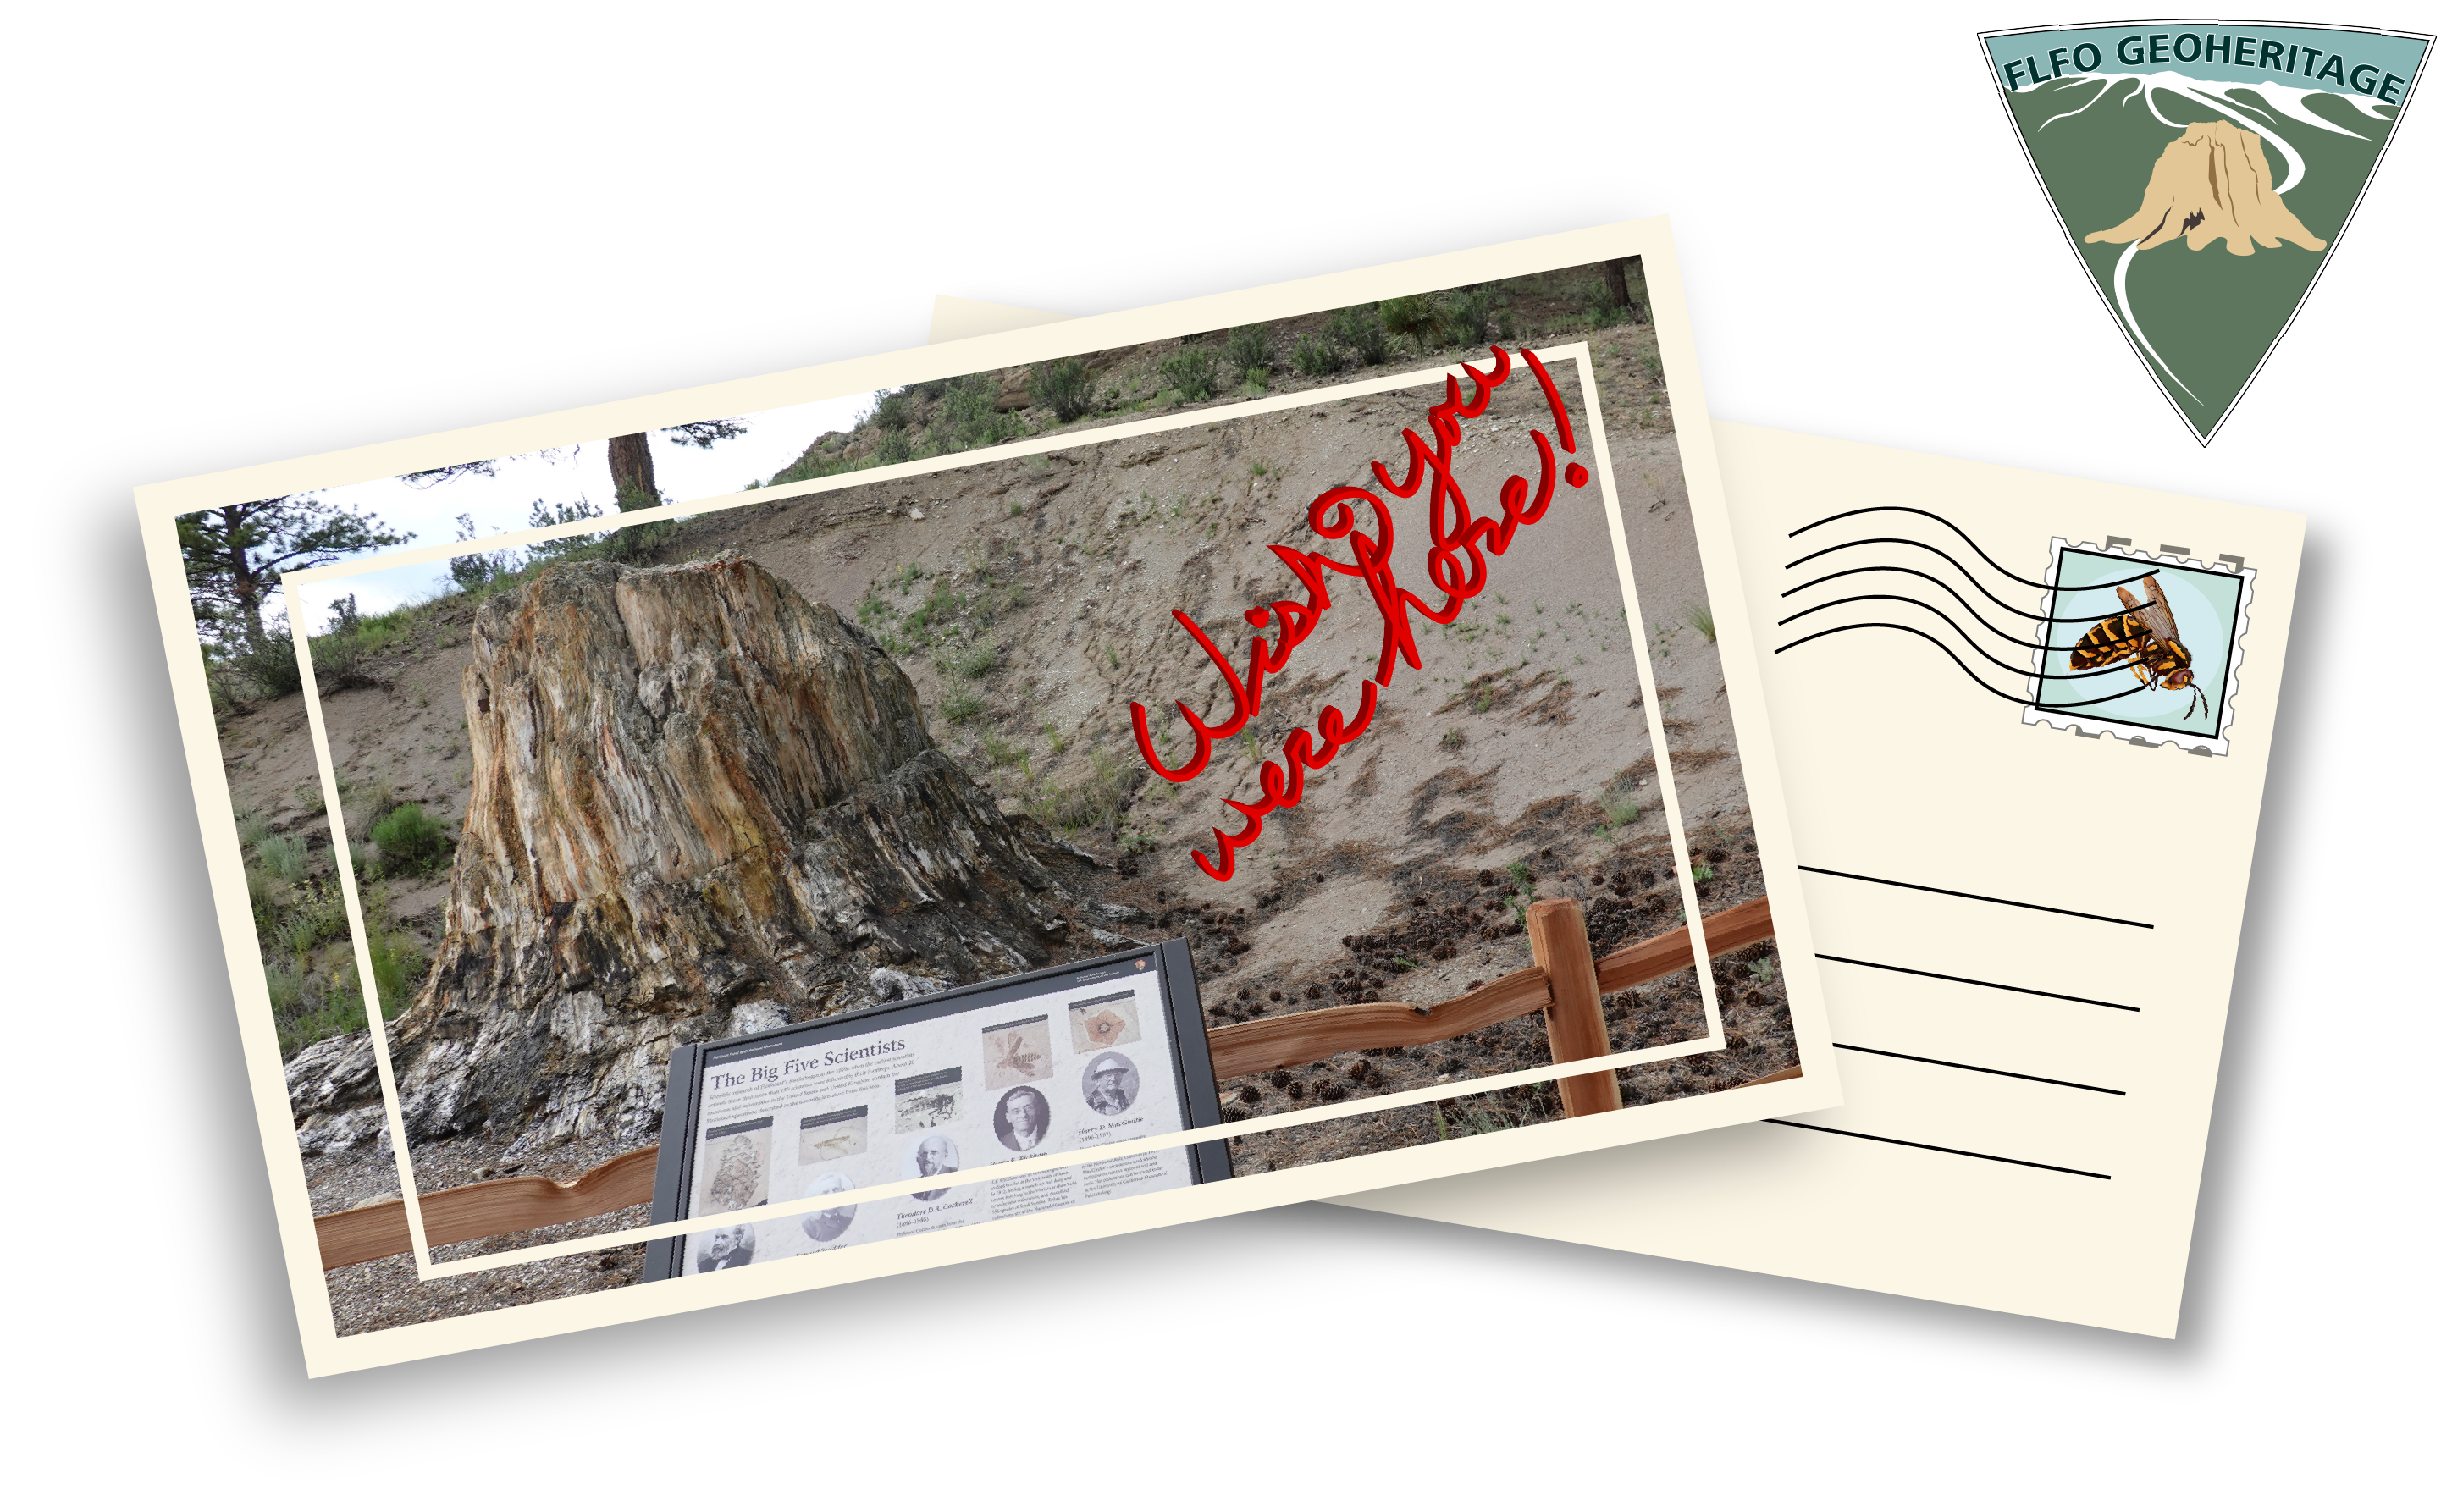 A post card with the image of a wayside and its surroundings that says "wish you were here" in red.